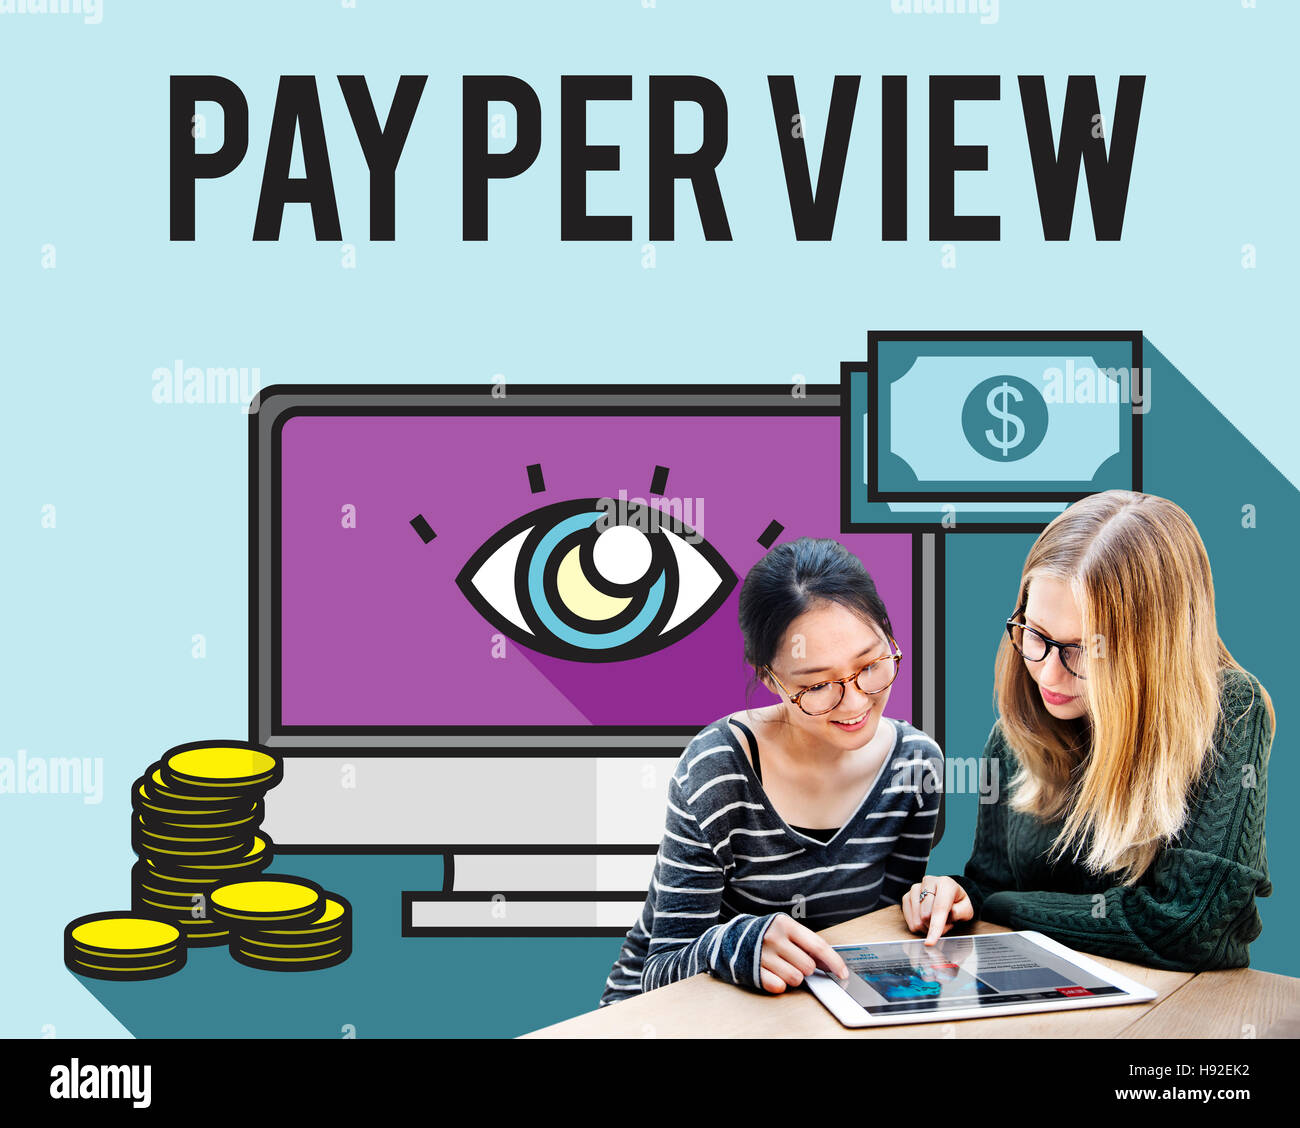 Pay Per View Online Marketing Concept Stock Photo - Alamy